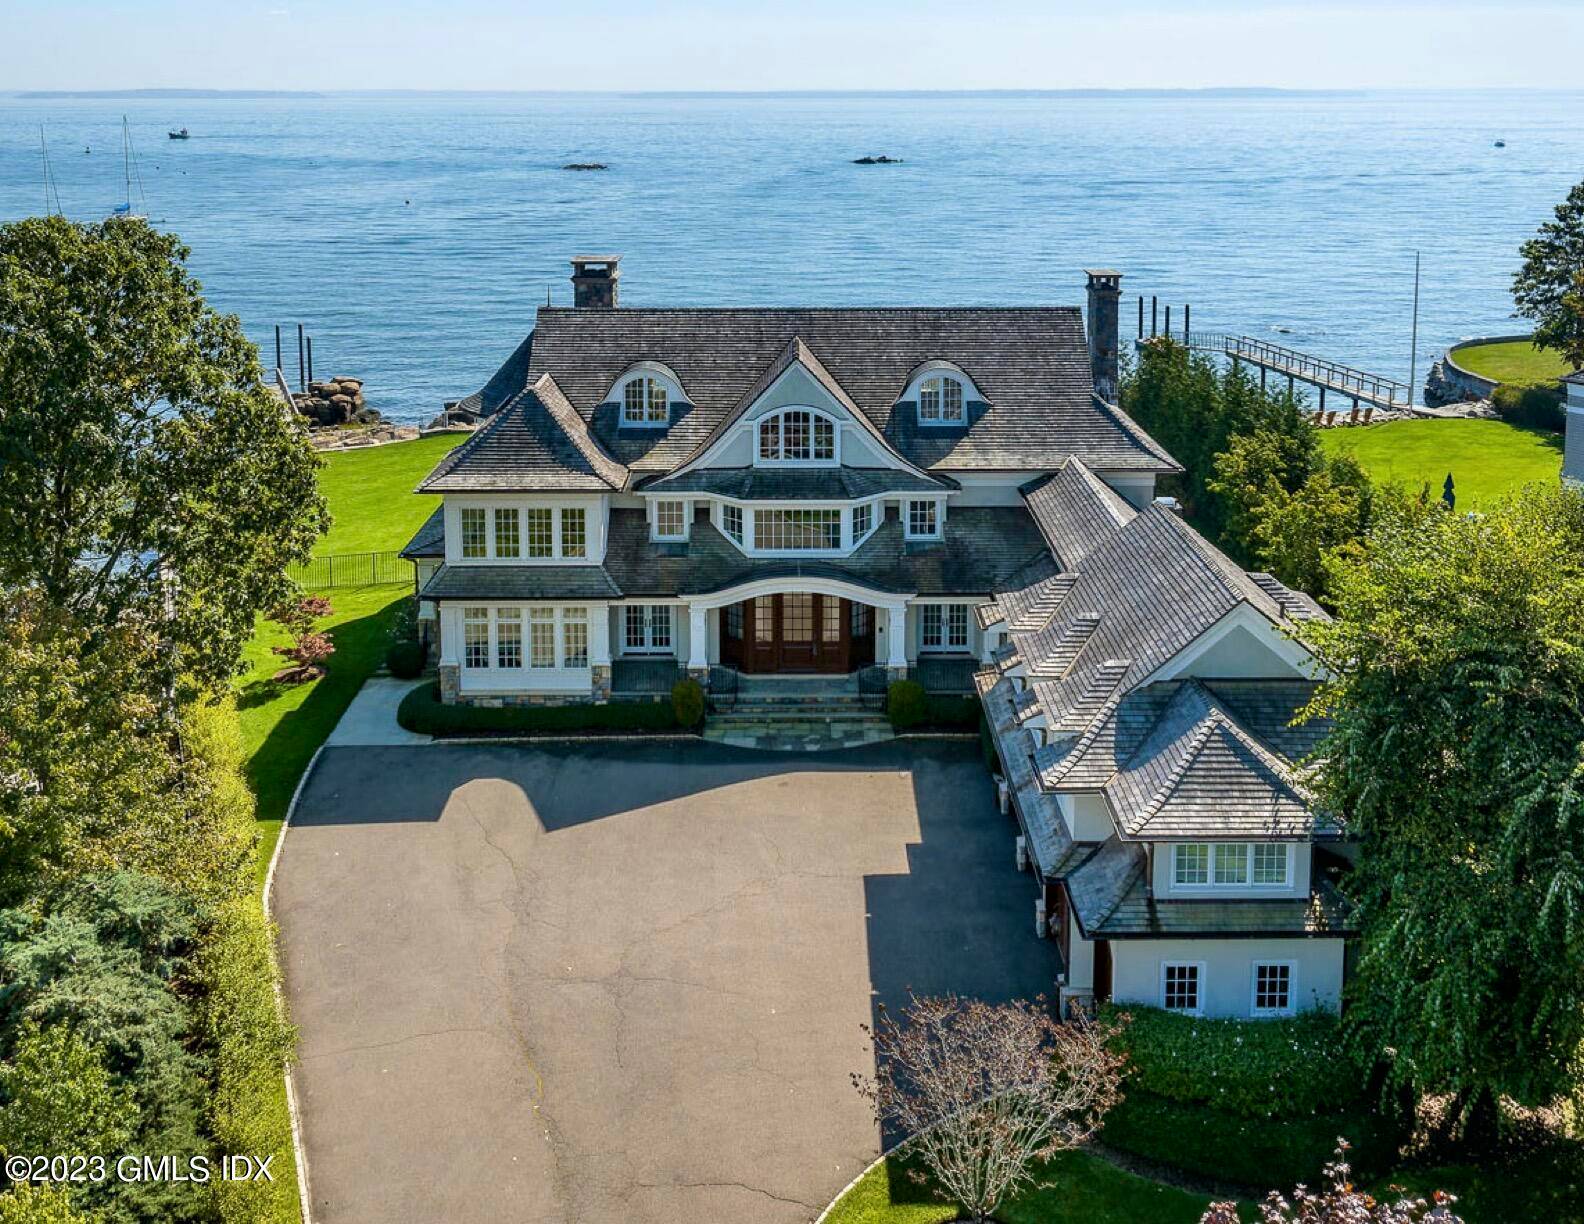 An idyllic waterfront estate, nestled in one of Darien's most wonderful locations.